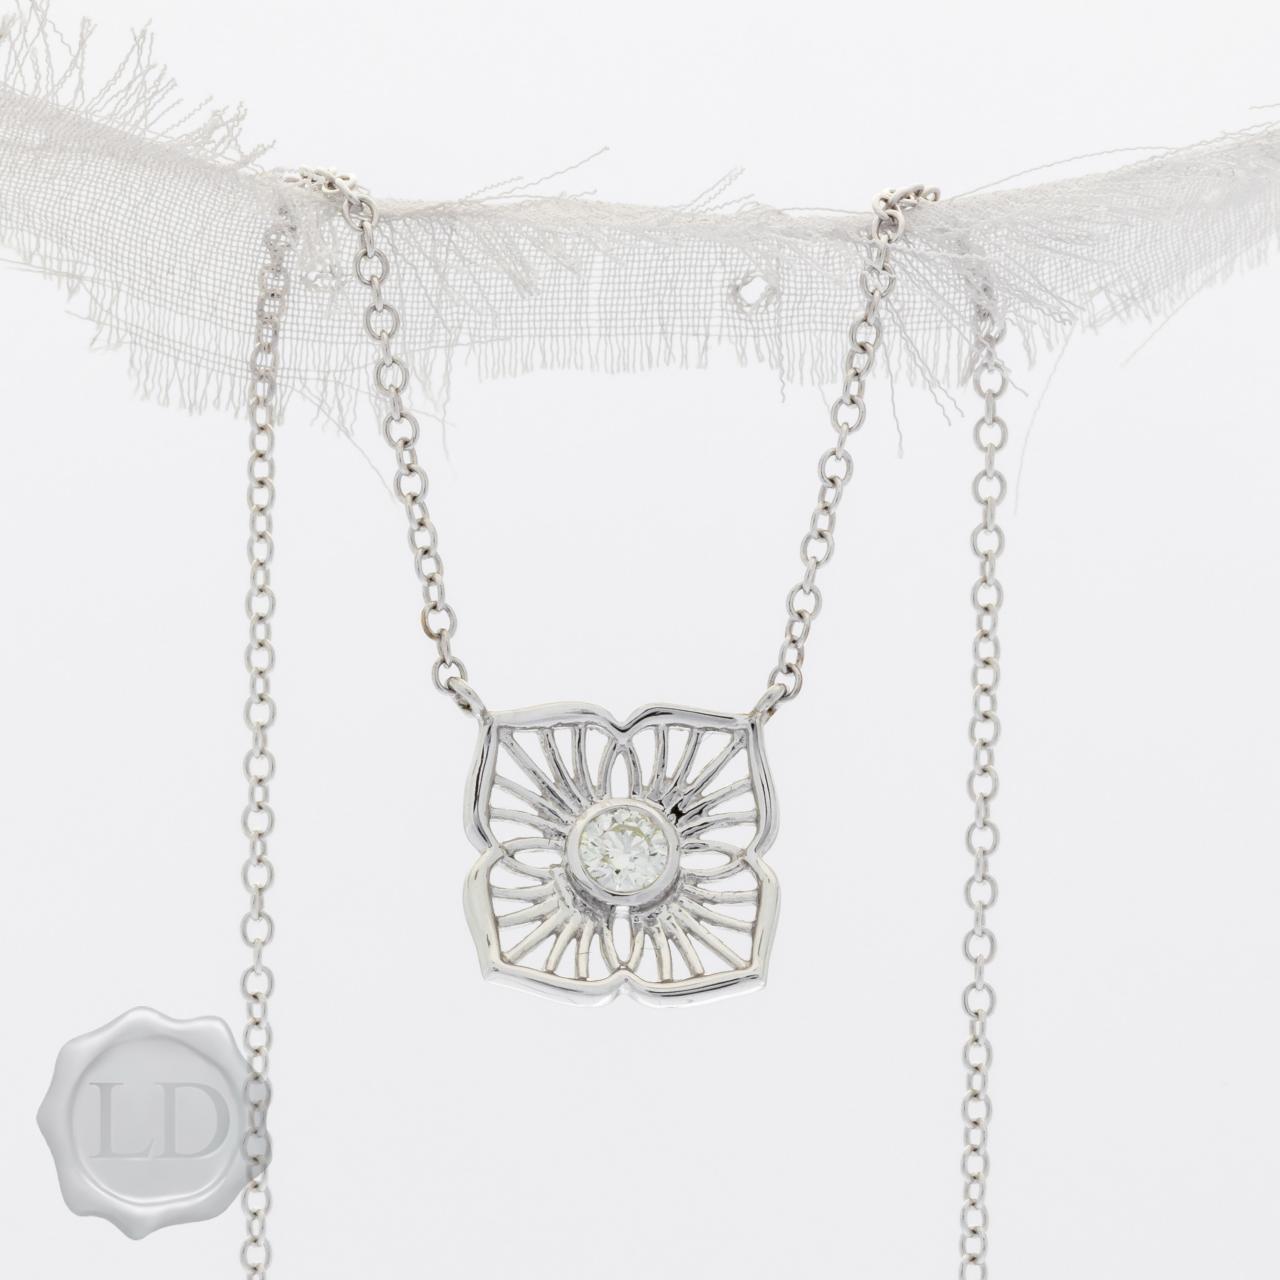 Lily necklace, white